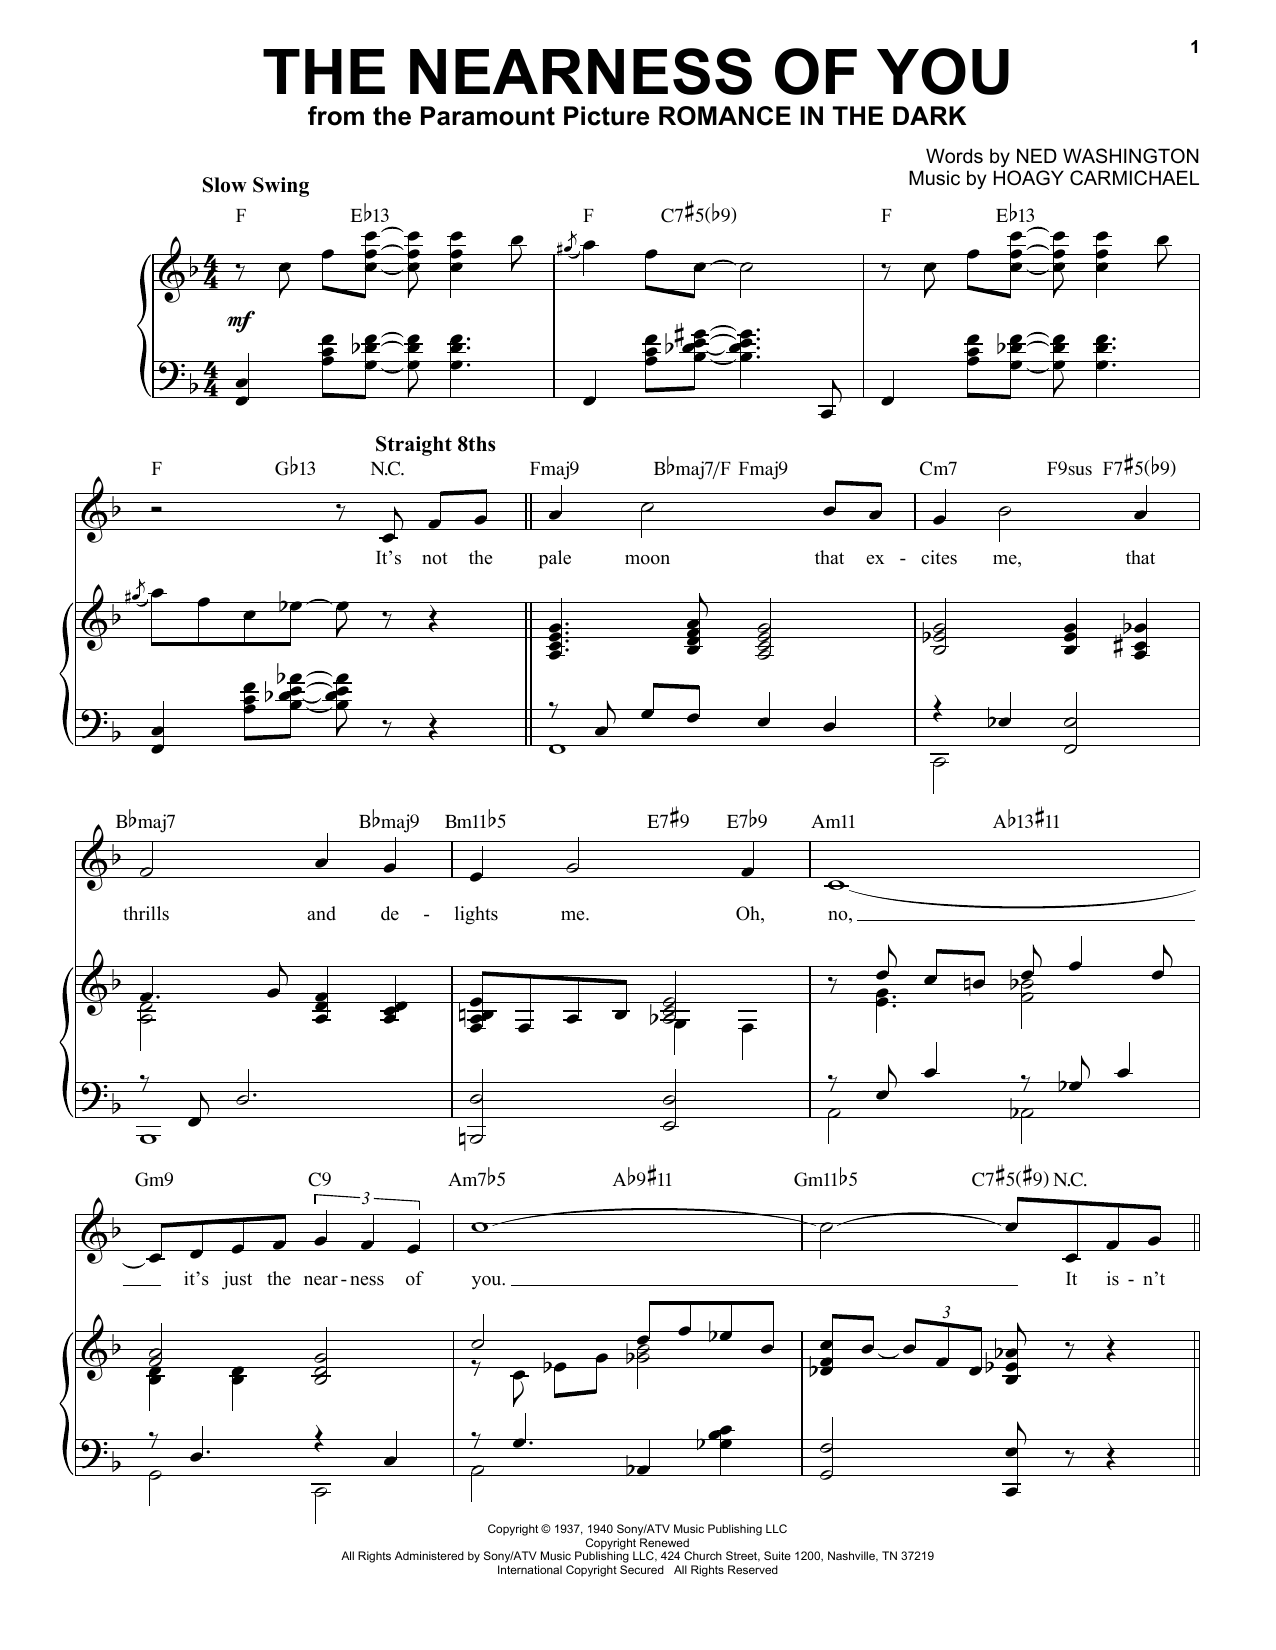 Download Ned Washington and Hoagy Carmichael The Nearness Of You [Jazz version] (arr Sheet Music